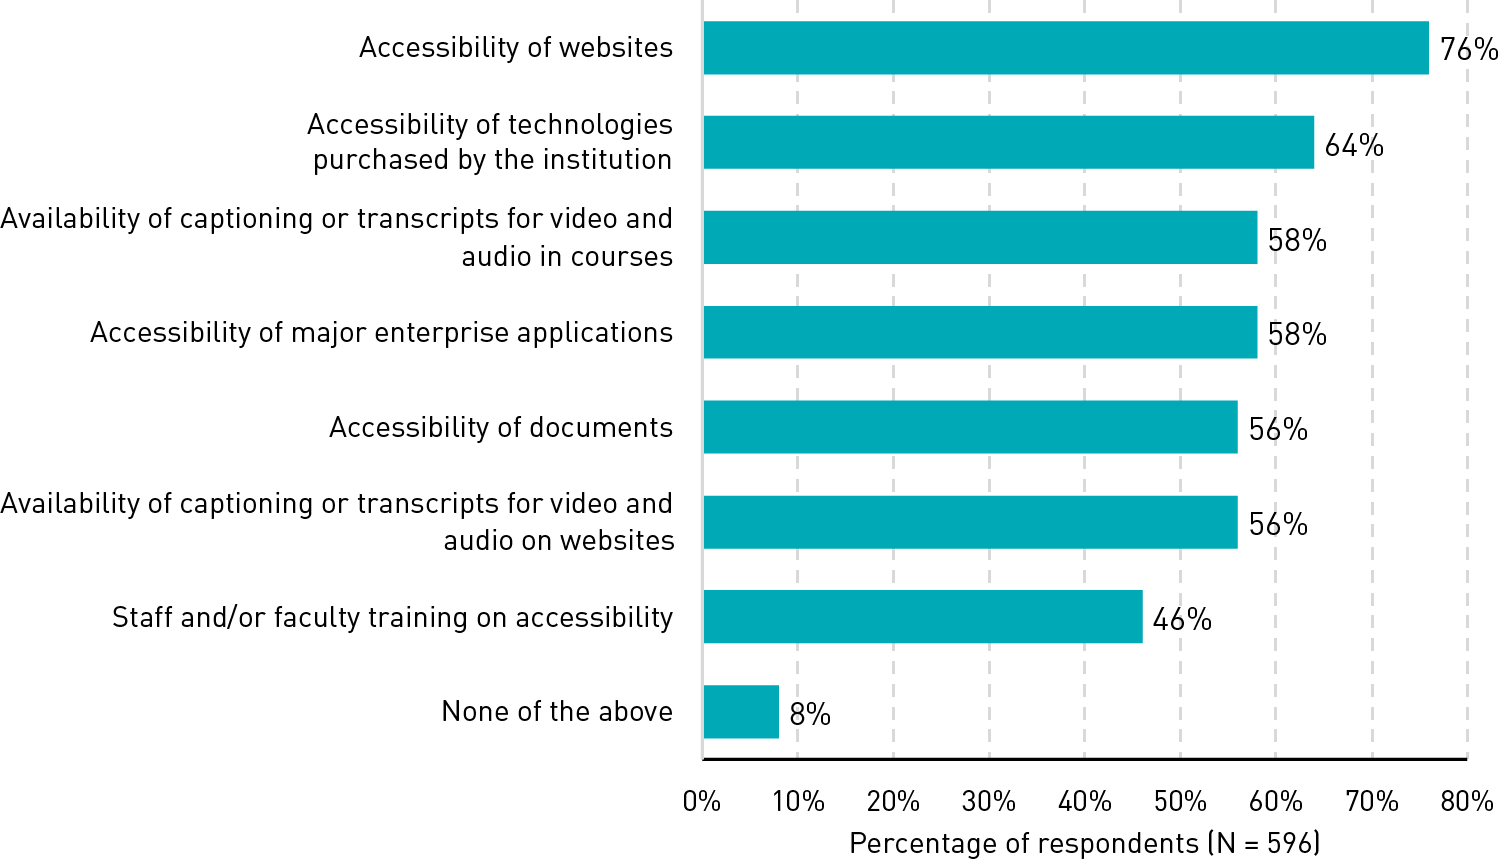 Bar chart showing the percentage of respondents who say their institution is regularly assessing and reporting on a list of accessibility supports: accessibility of websites (76%), accessibility of technologies purchased by the institution (64%), availability of captioning or transcripts for video and audio in courses (58%), accessibility of major enterprise applications (58%), accessibility of documents (56%), availability of captioning or transcripts for video and audio on websites (56%), staff and/or faculty training on accessibility (46%), and none of the above (8%).